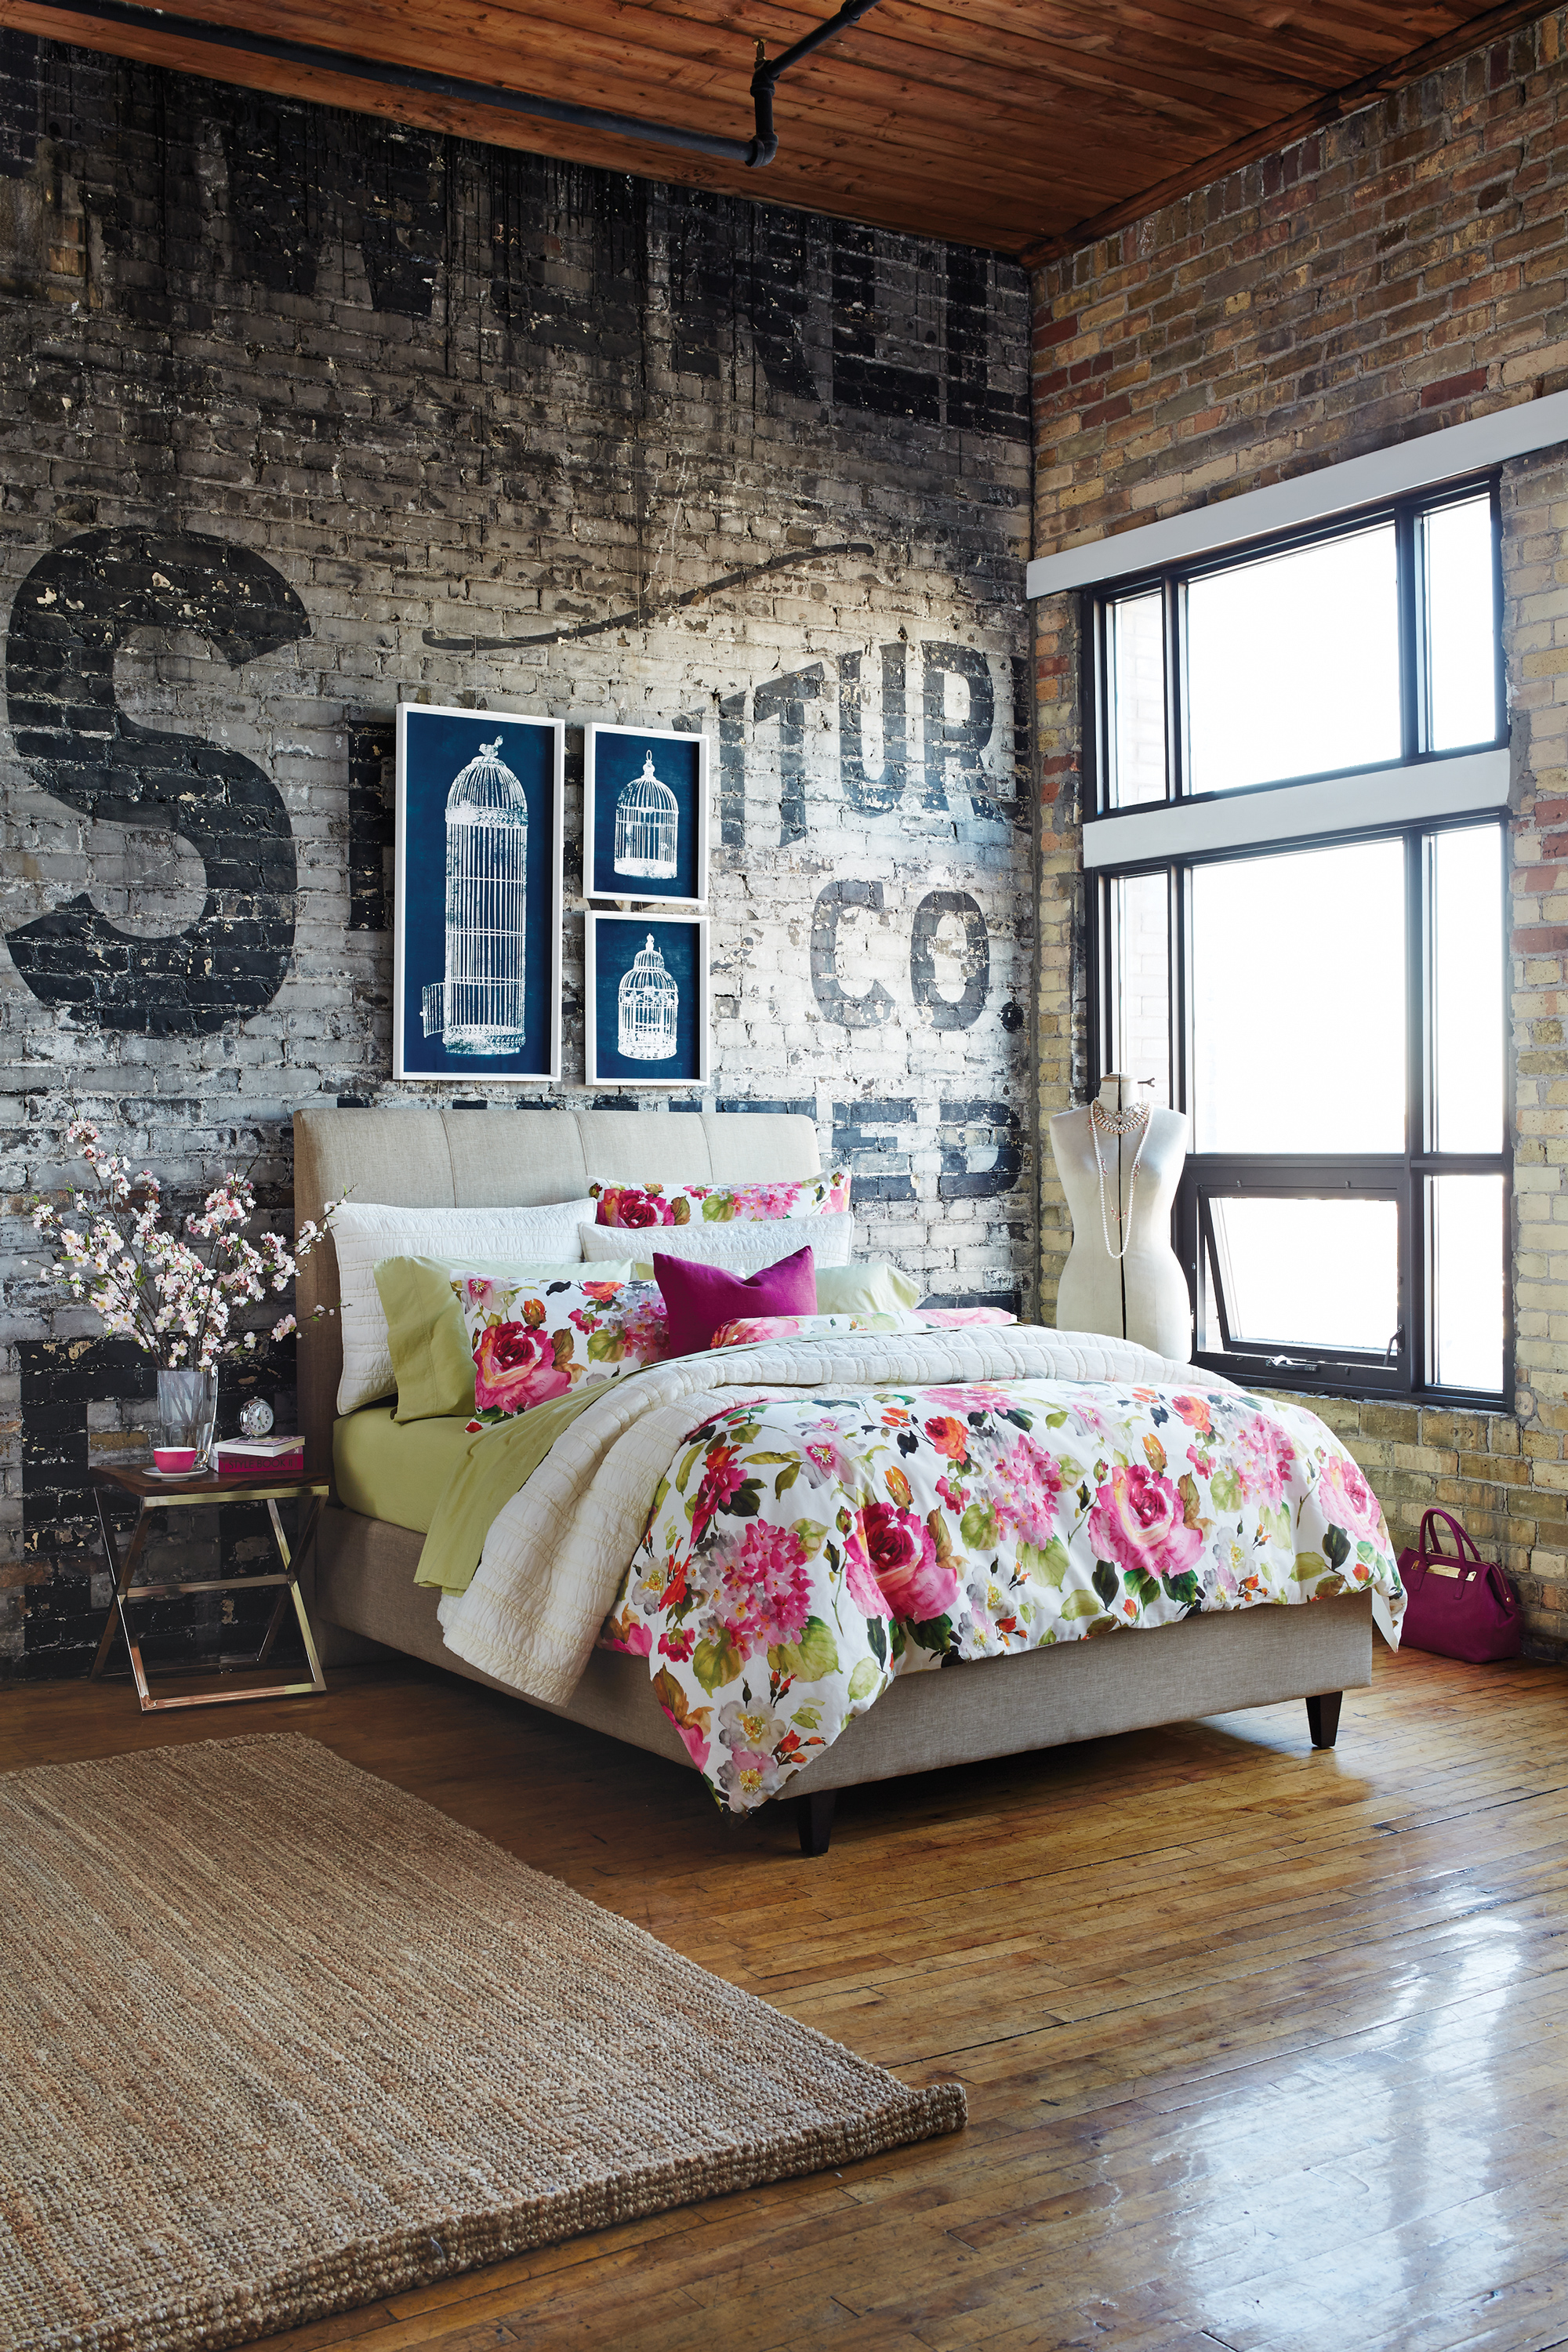 Industrial Bedrooms That You Would Love To Sleep In